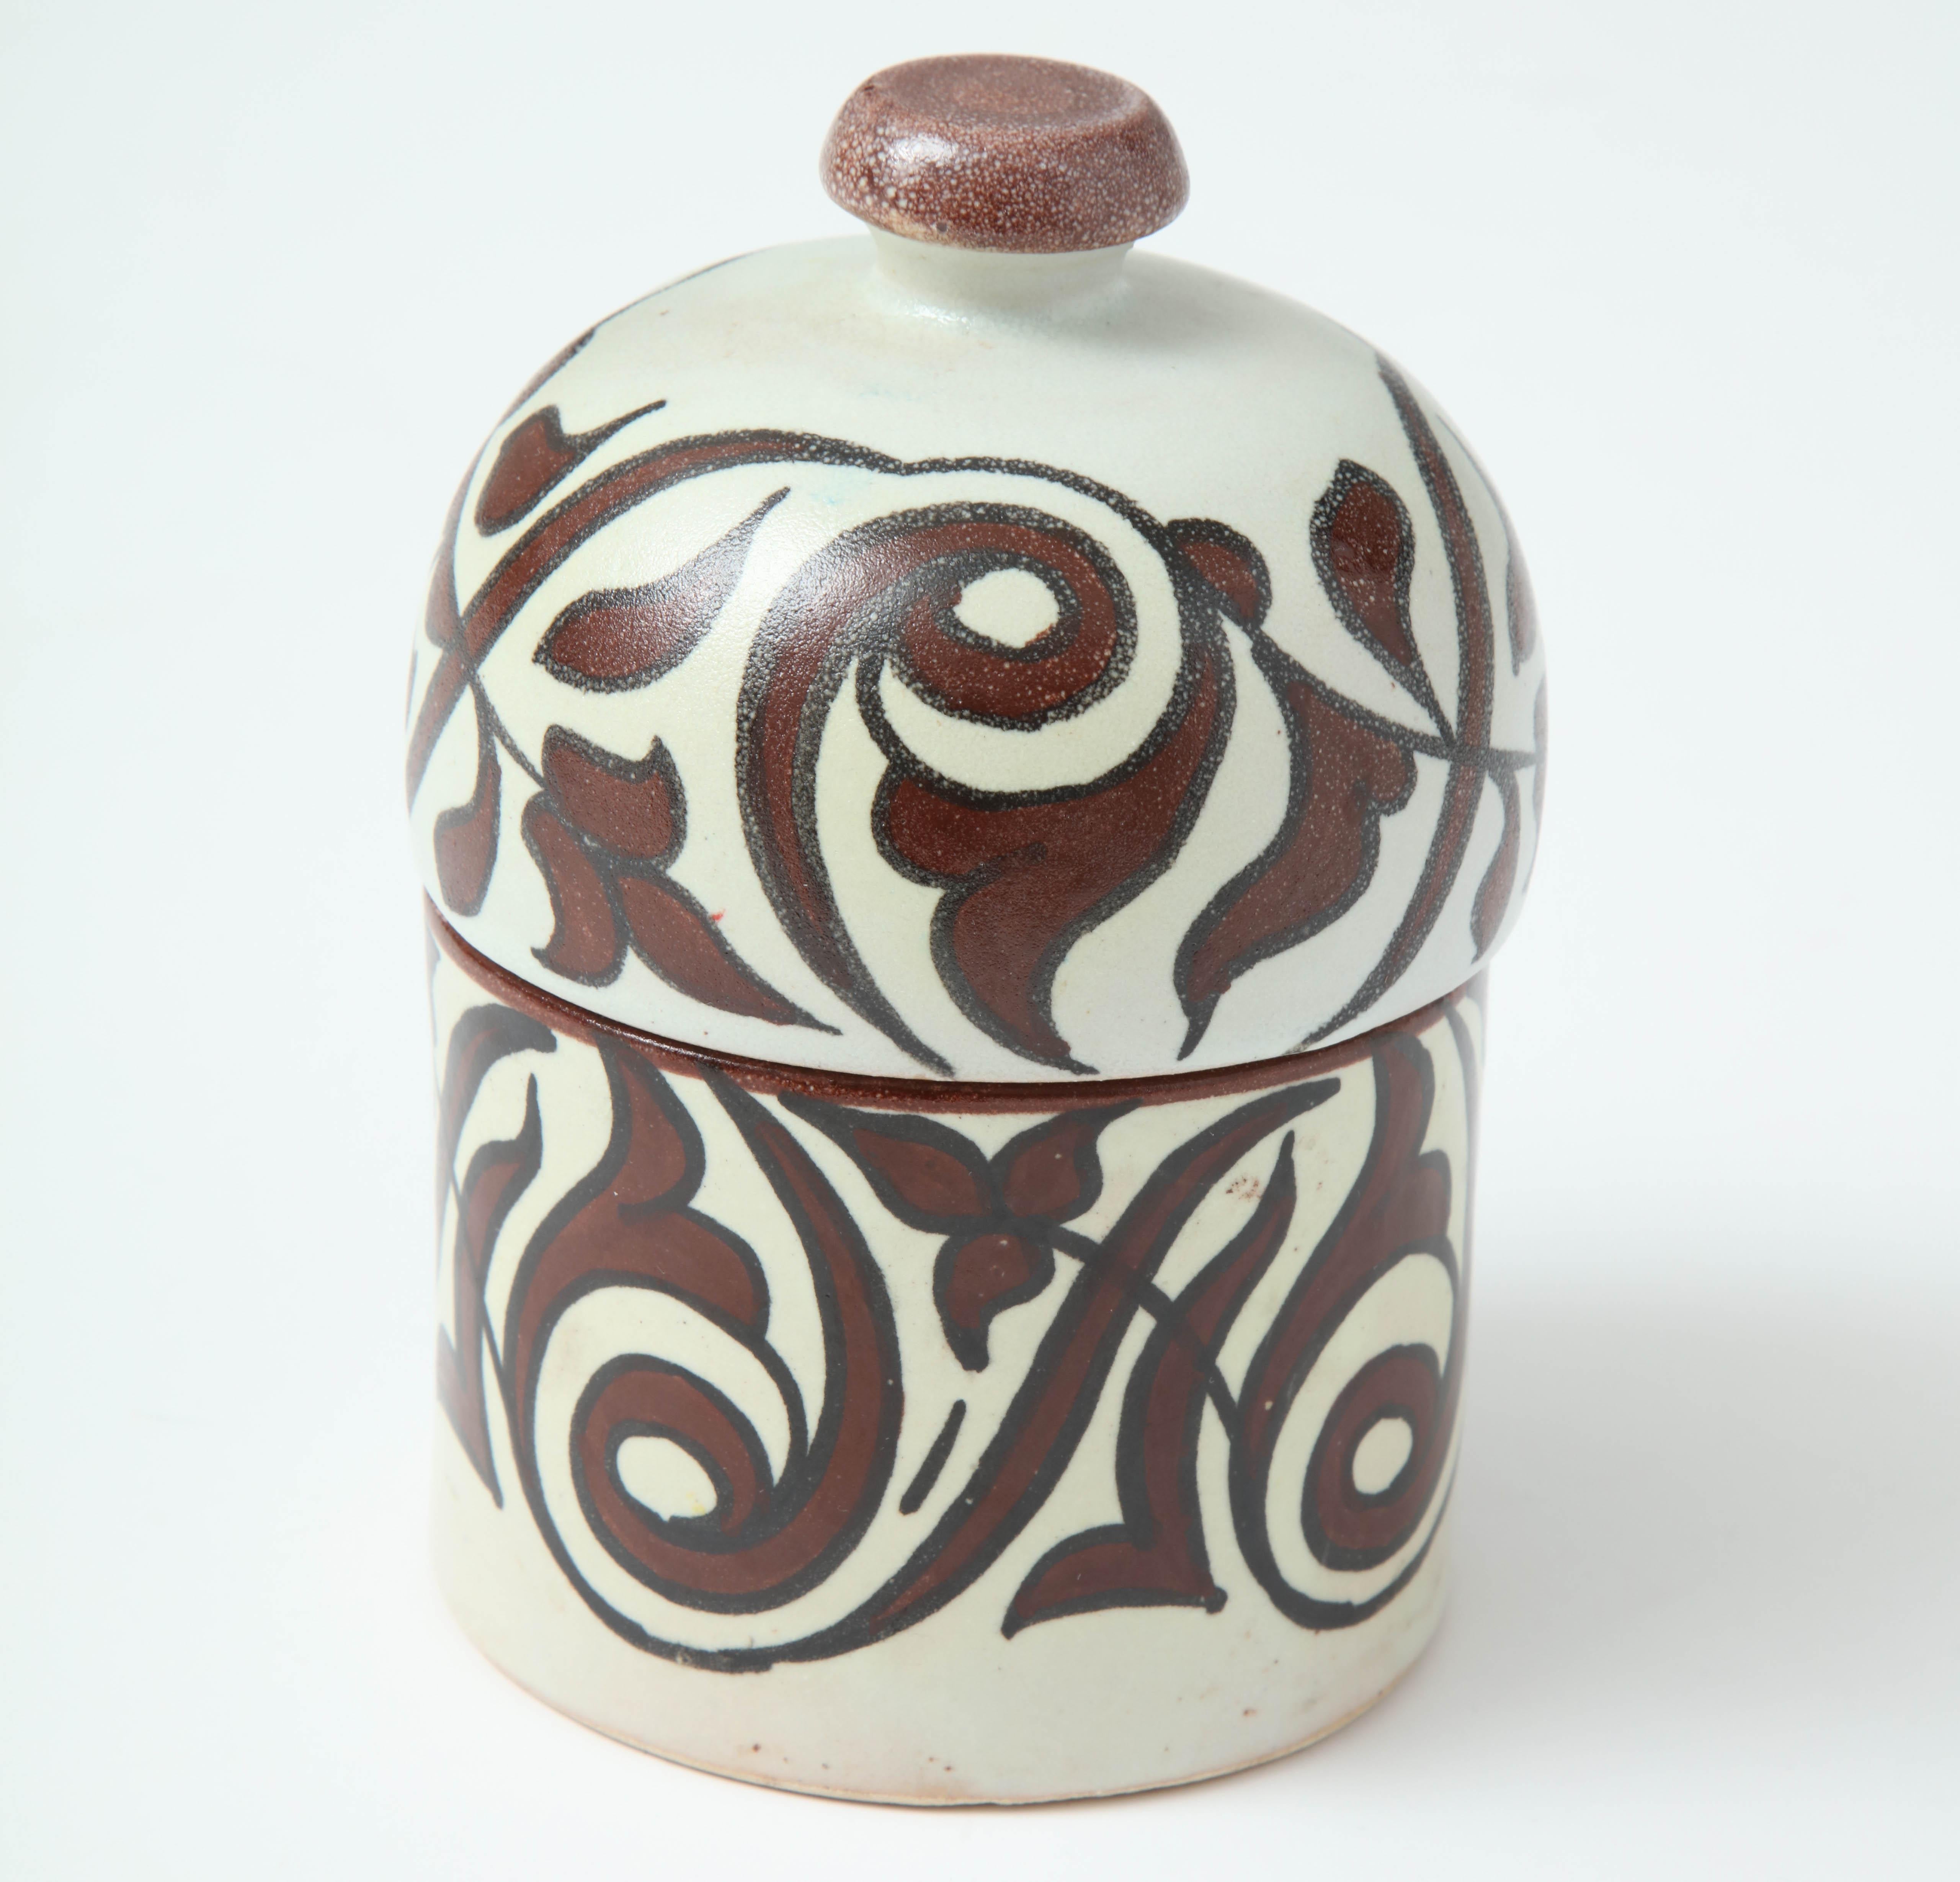 Moroccan Pottery from Morocco, Cream & Burgundy Color, Handcrafted, Contemporary Ceramic For Sale